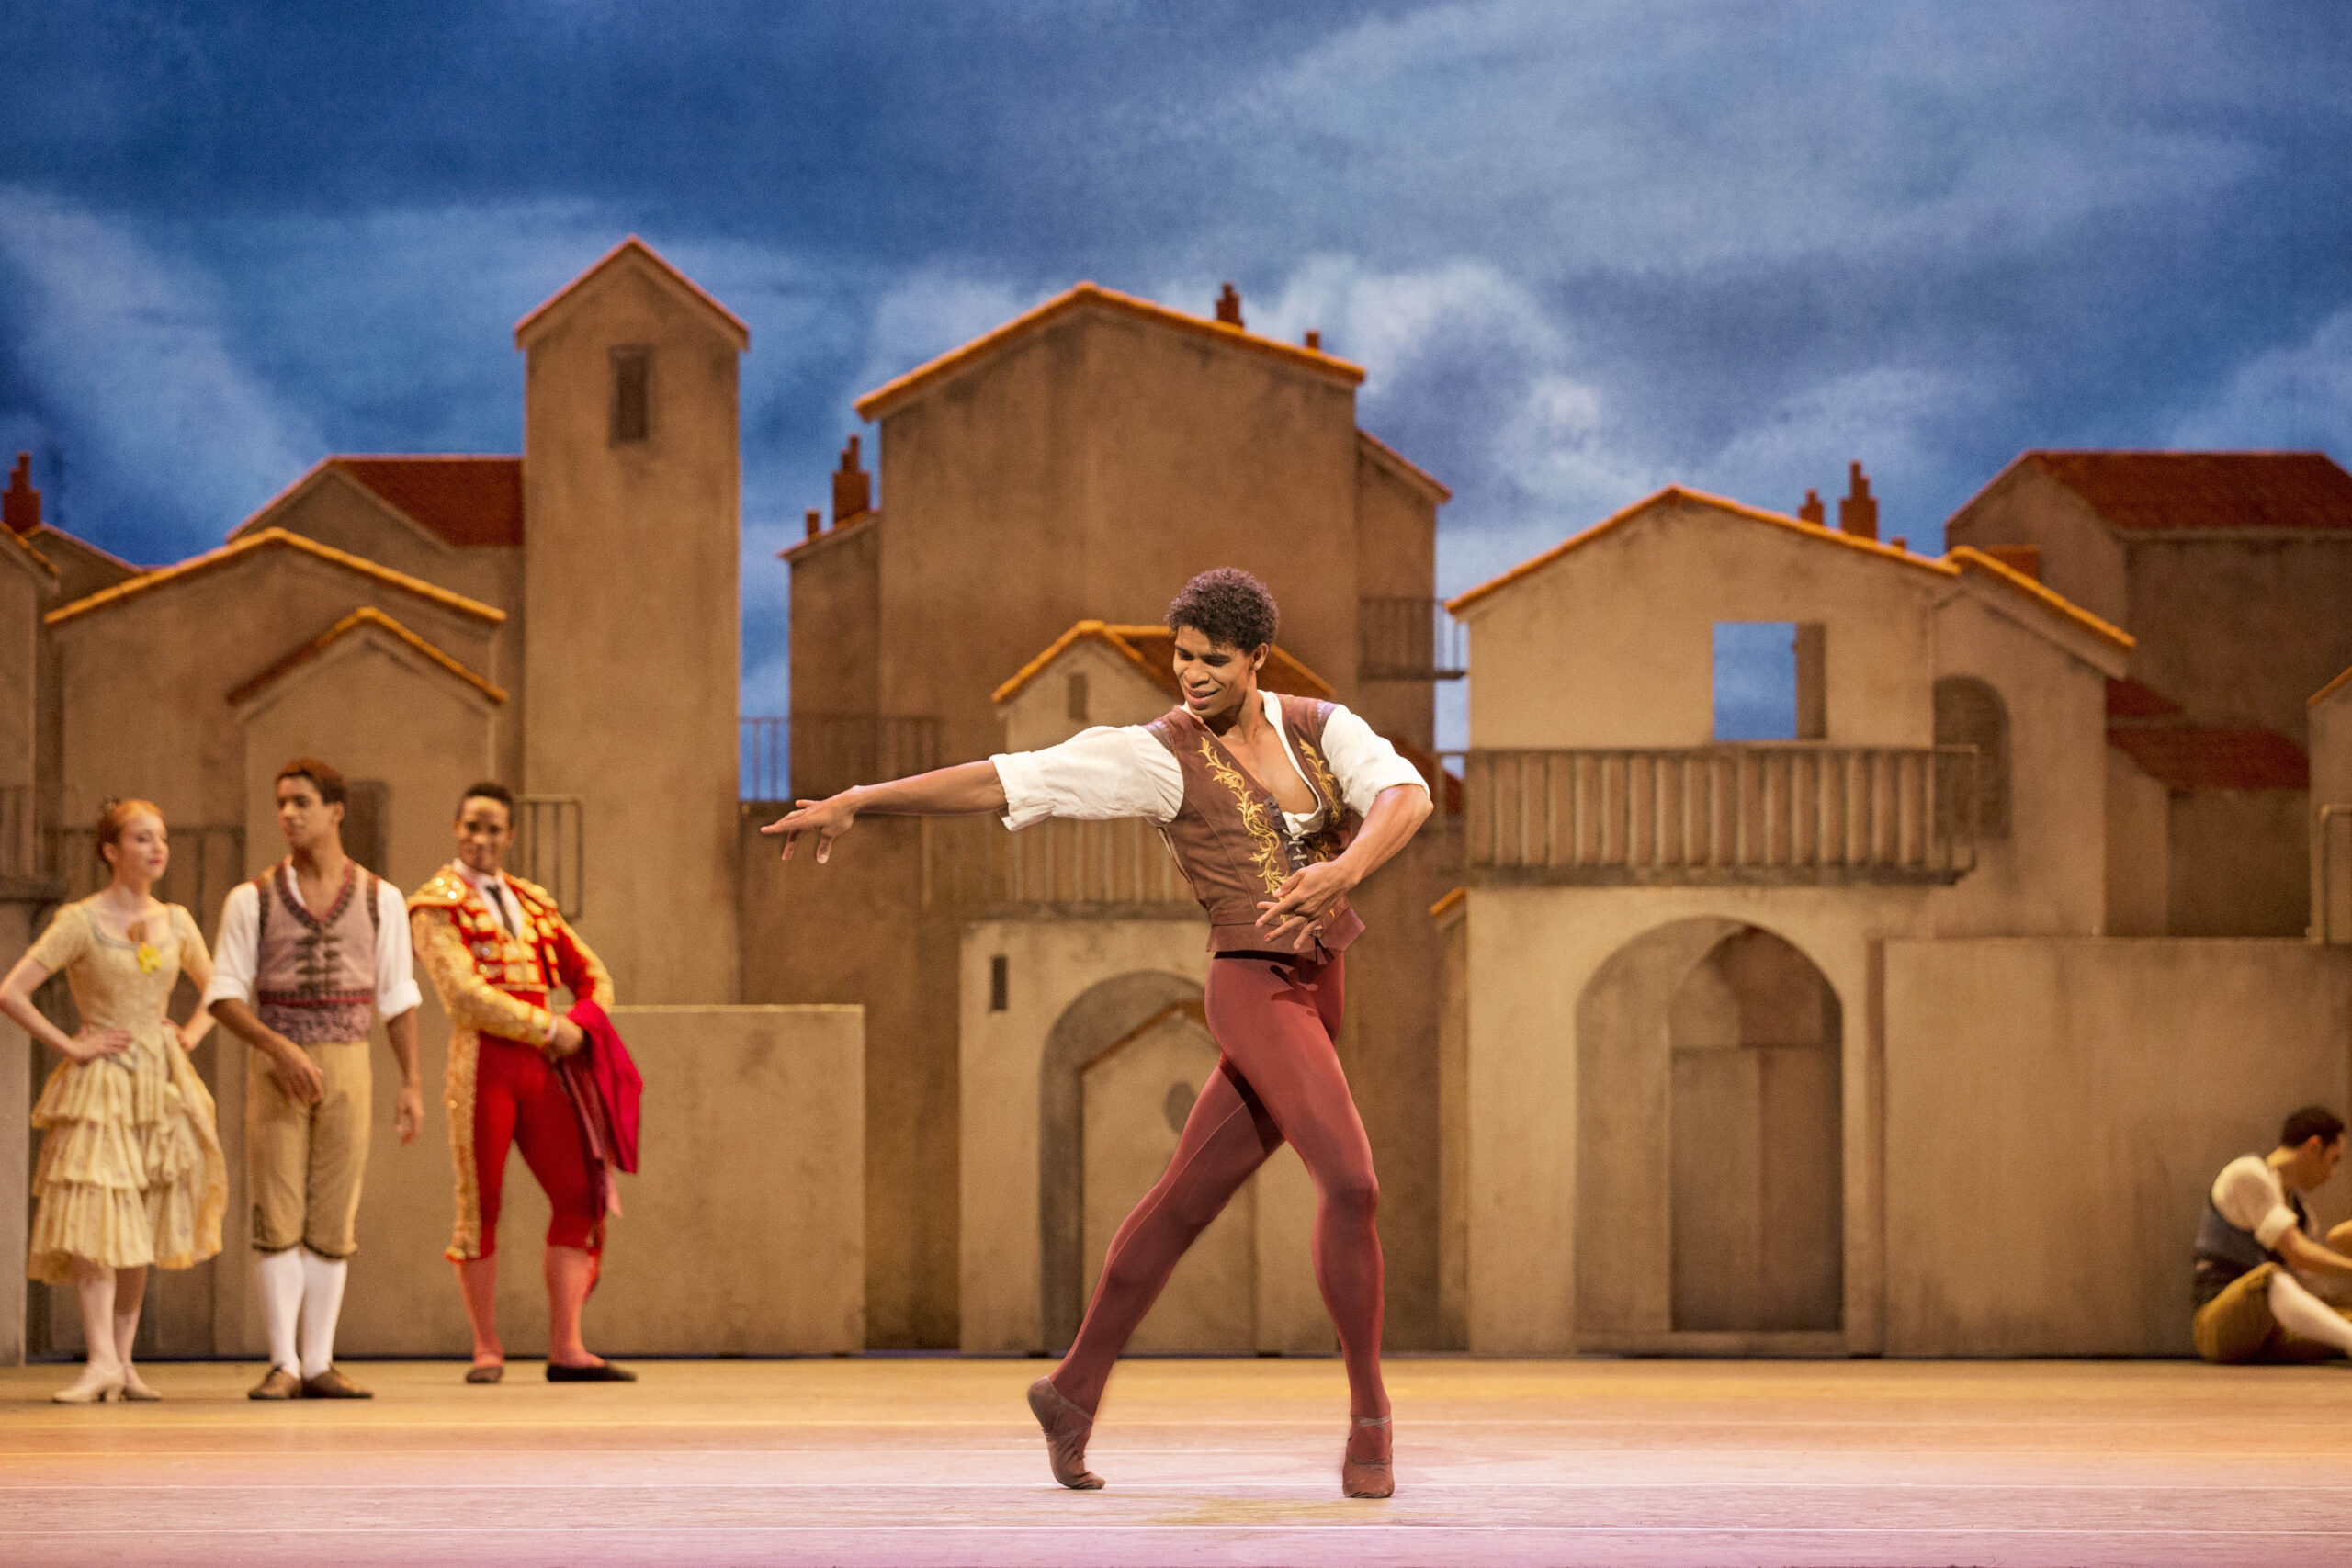 Carlos Acosta performs in Don Quixote on the Royal Opera House stage. He wears a tunic and tan vest with rust-colored tights and poses passionately in a tight lunge on forced arch, looking back at his extended right arm.